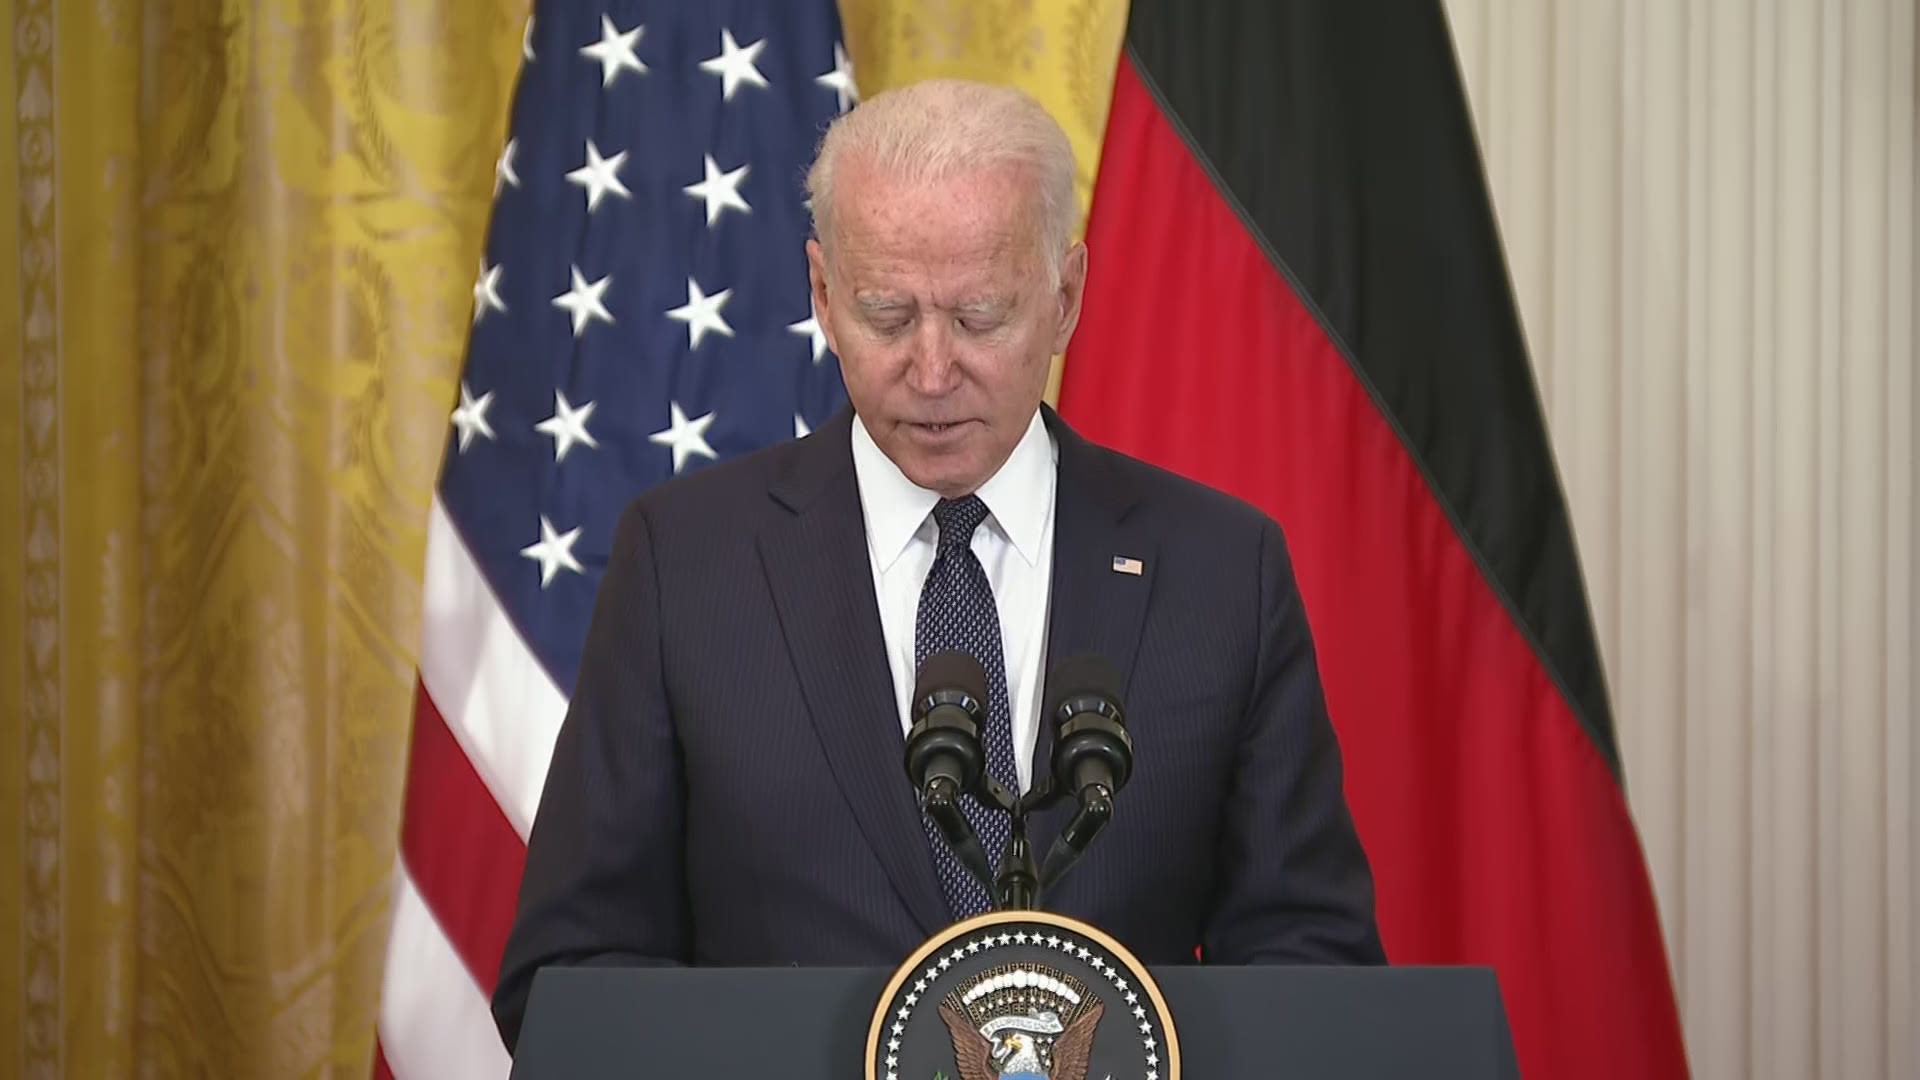 Biden announced plans to continue a partnership with Germany into the future that will "collaborate on the two countries' shared future."